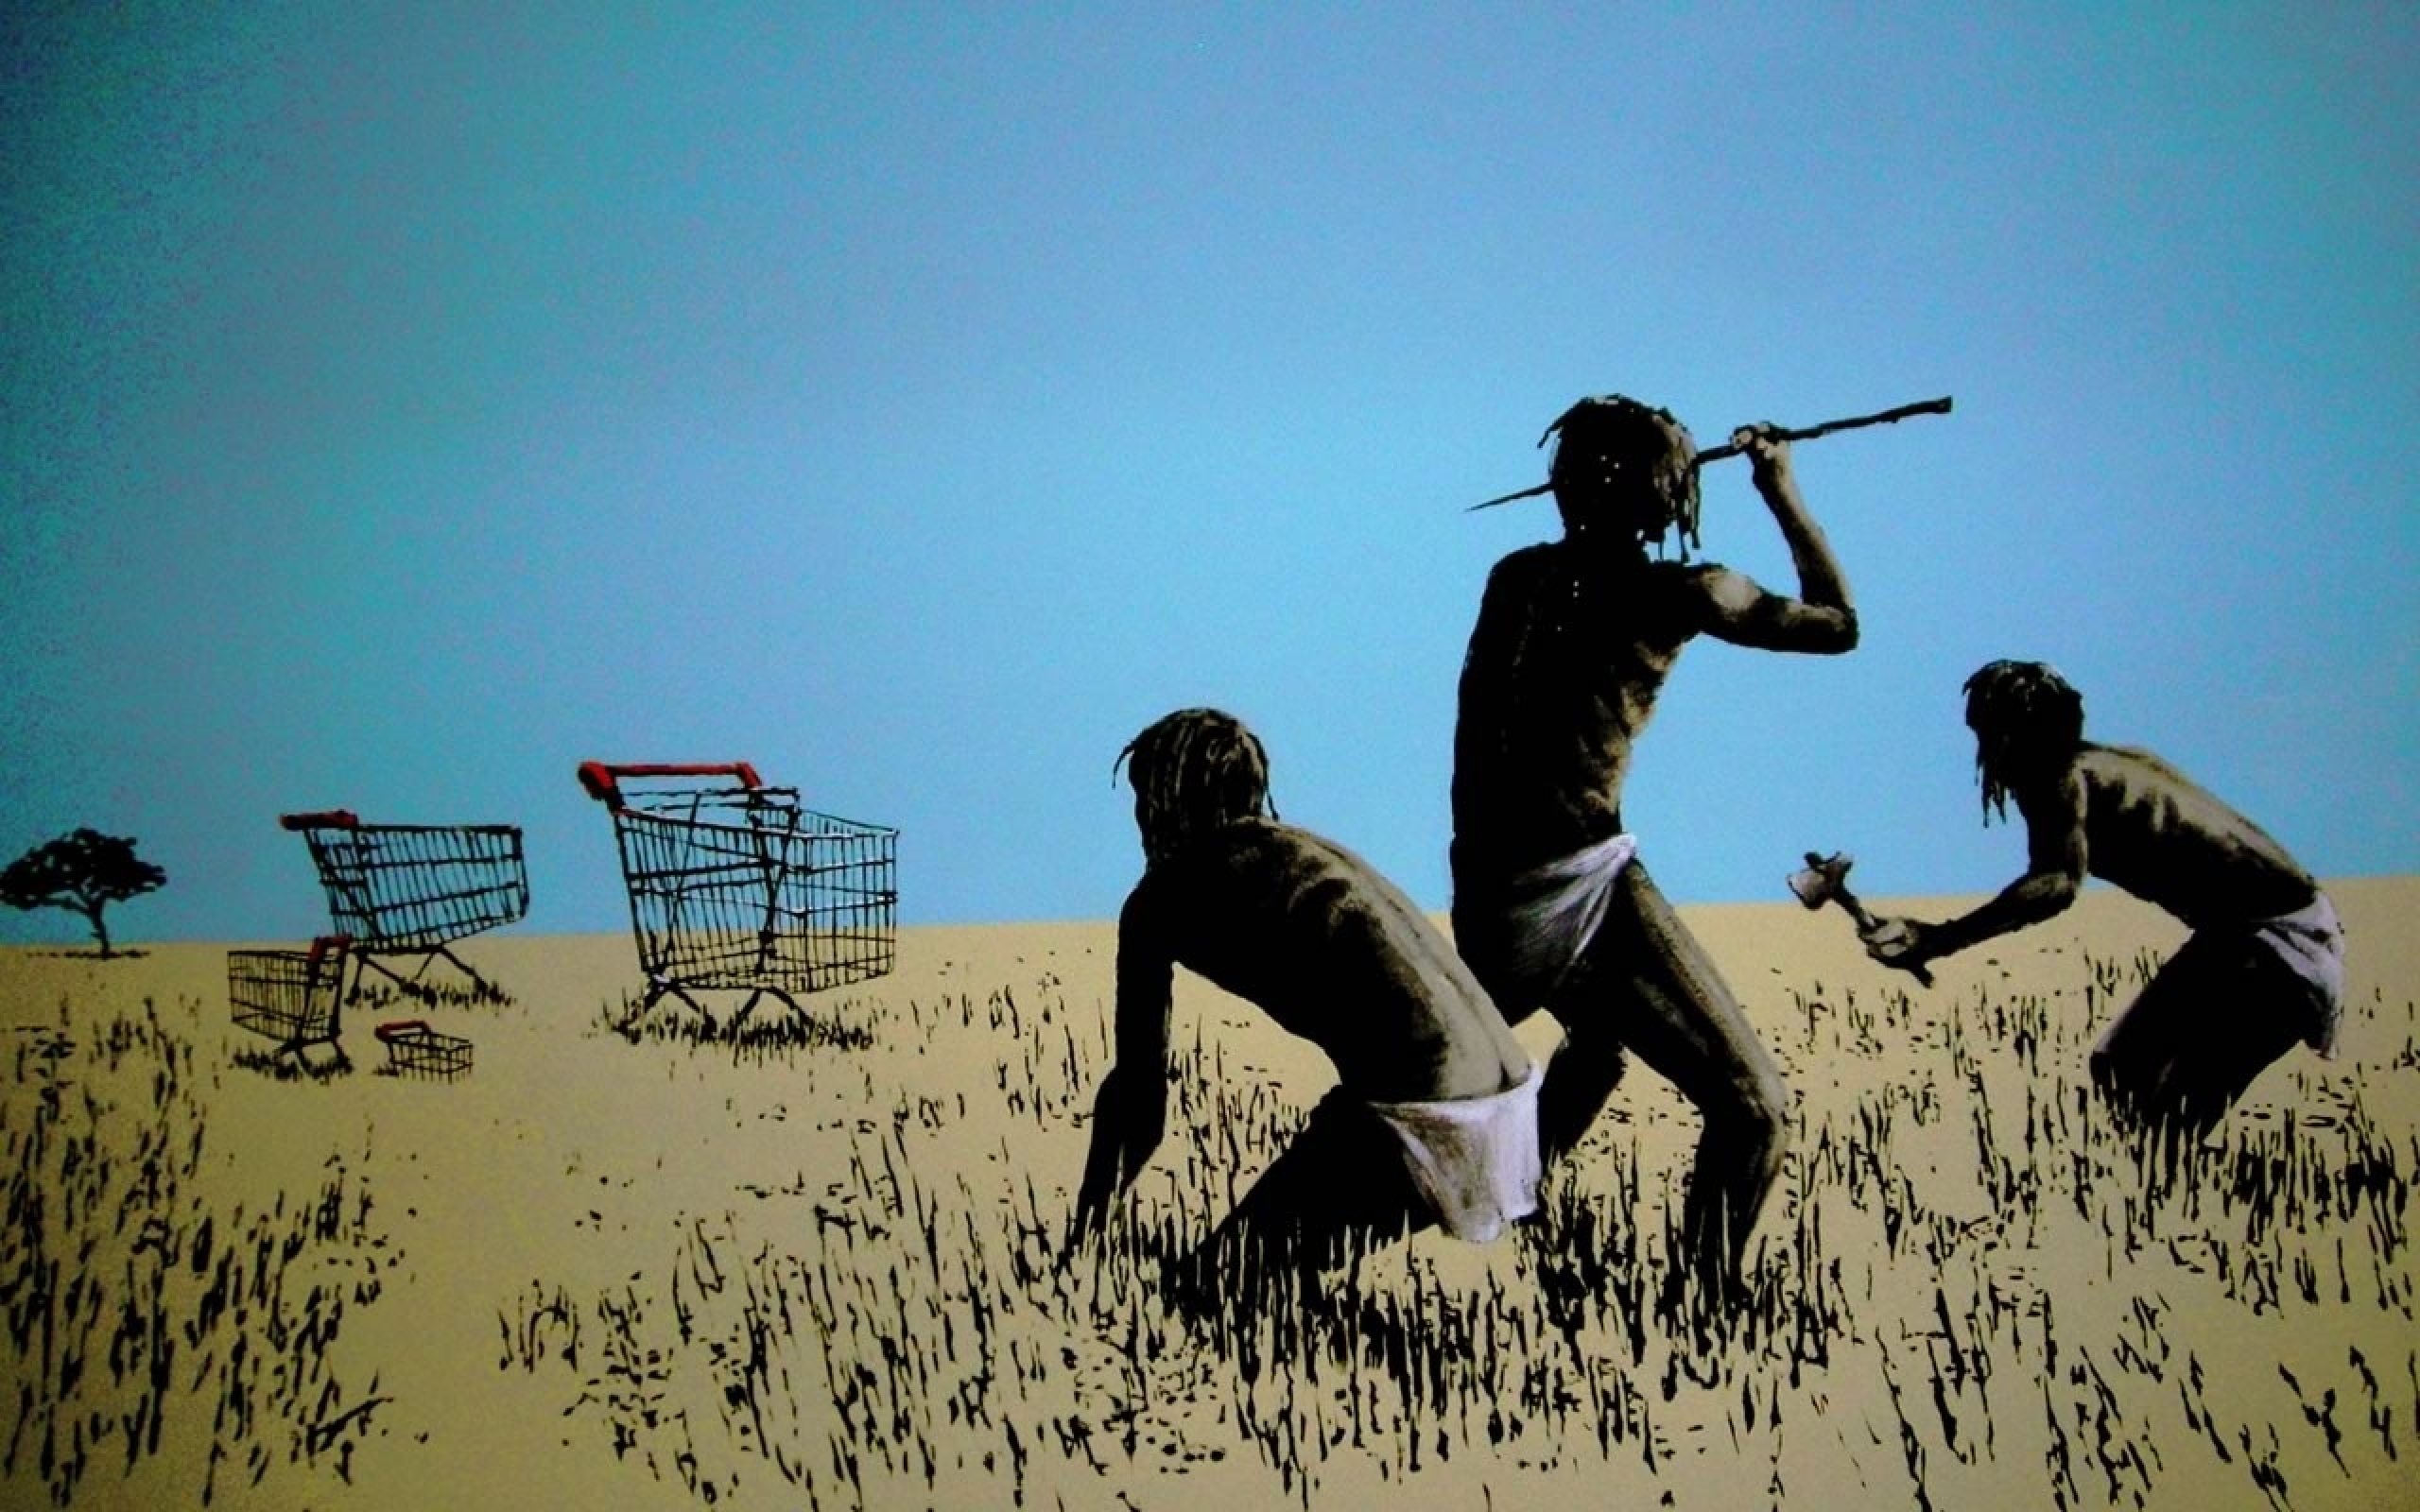 Carts Banksy Wallpaper And Image Pictures Photos